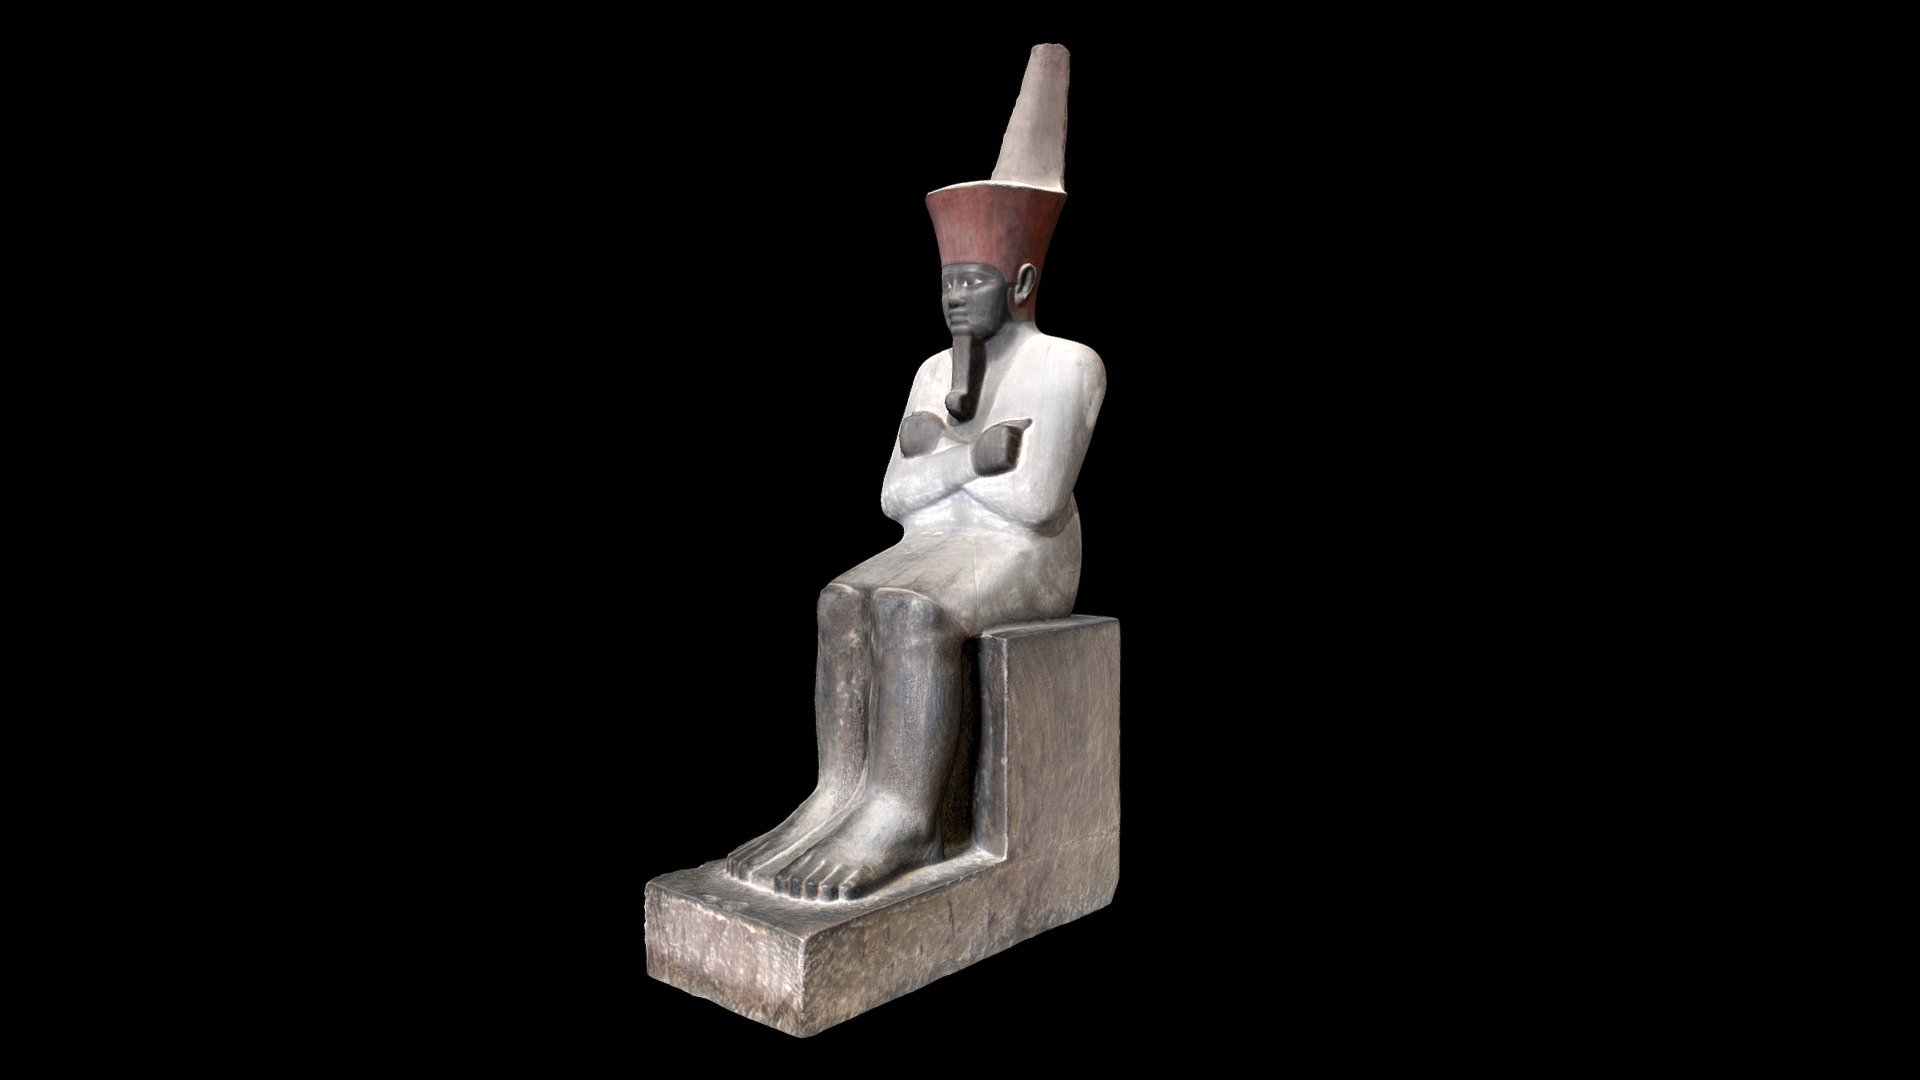 Painted statue of Mentuhotep II from his mortuary complex at Deir el-Bahri, Egypt.  Dynasty 11. Currently in the Egyptian Museum, Cairo.

Created from 89 photographs (Canon EOS Rebel T5i) using Metashape 1.6.1. Photographed in January 2018 3d model